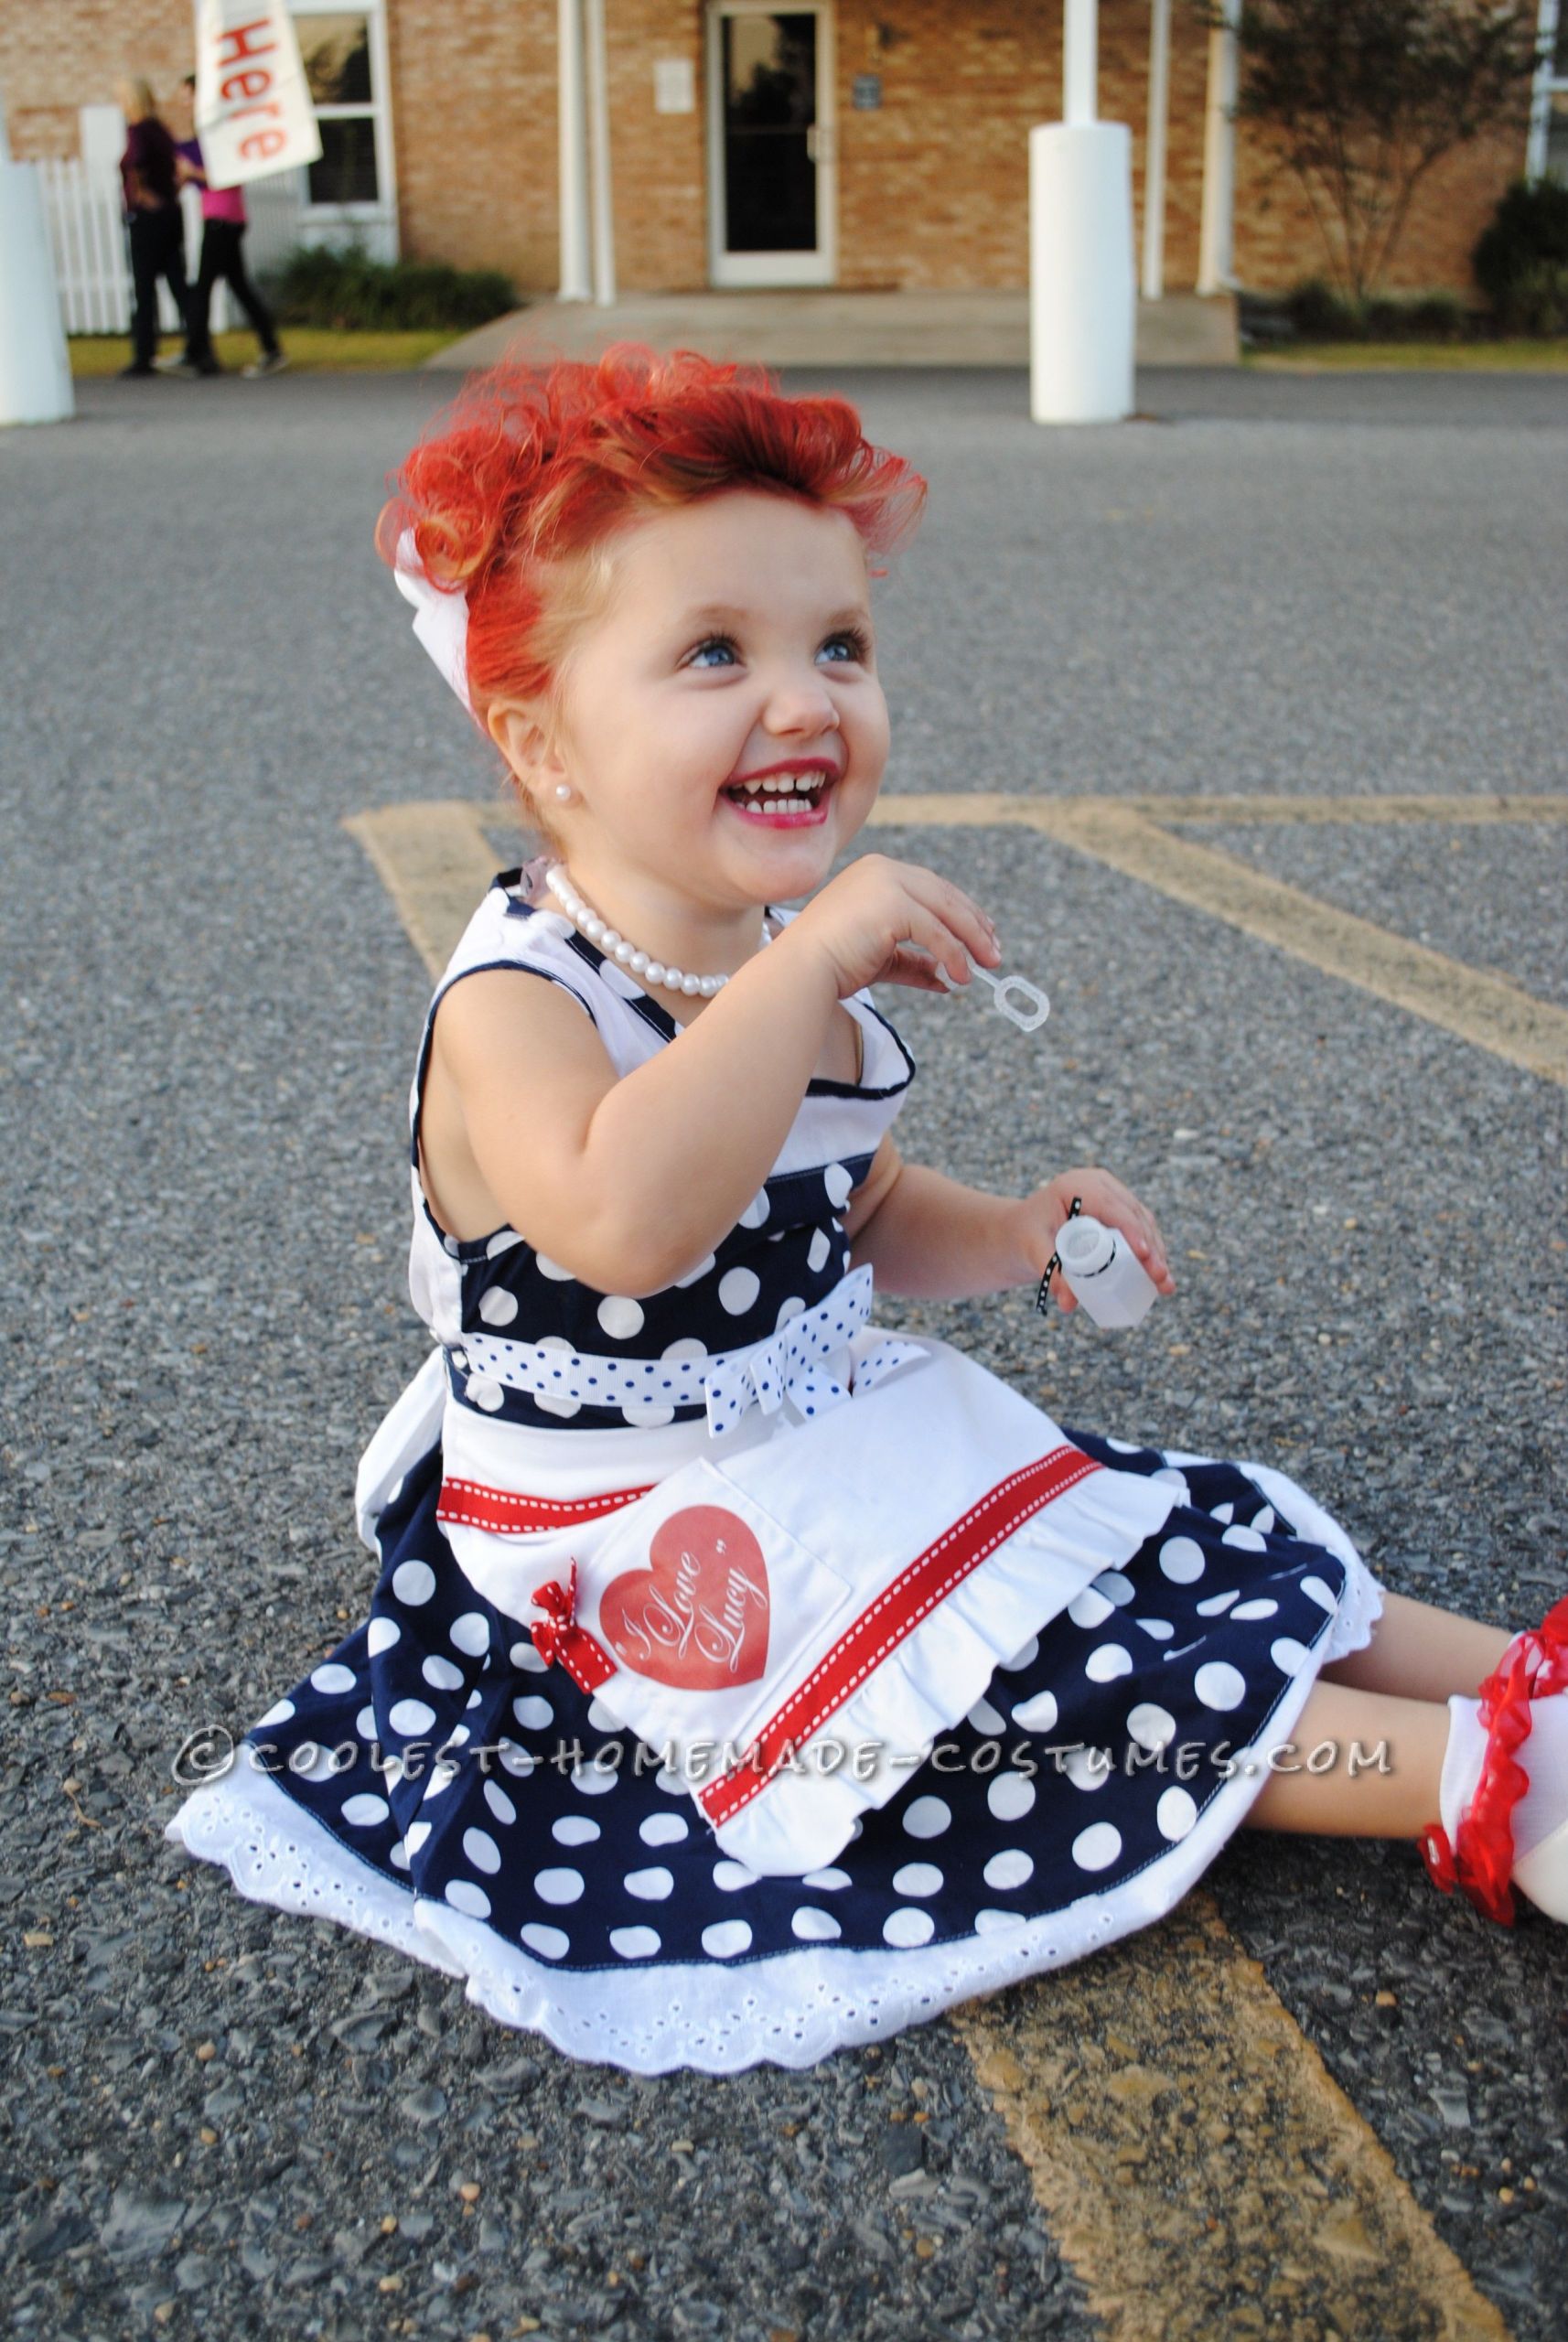 Kids Halloween Costumes DIY
 Adorable “I Love Lucy” Homemade Costume for a Toddler